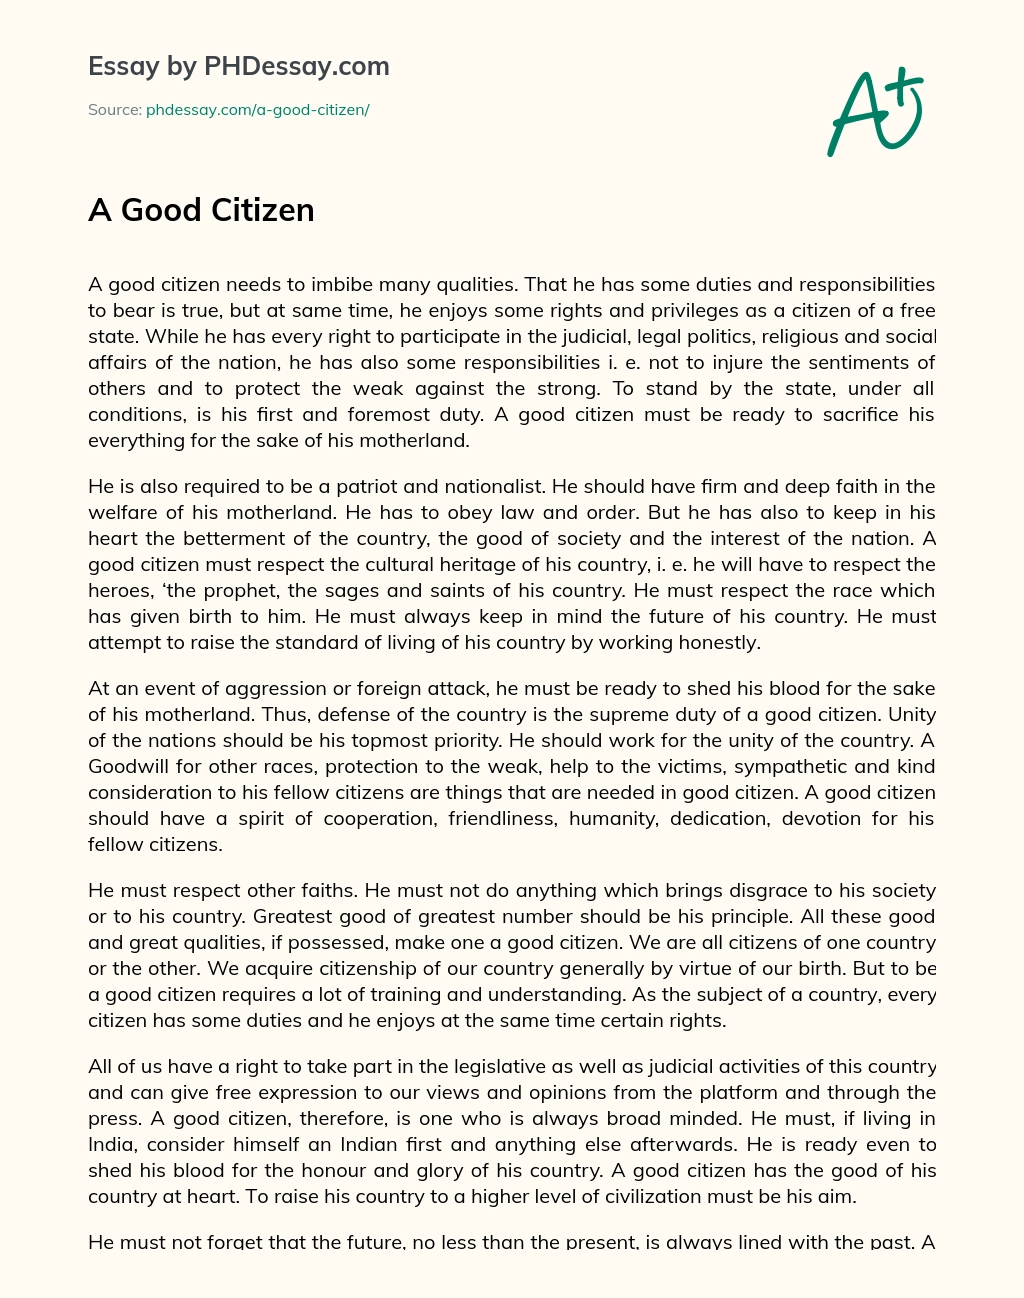 what are the qualities of a good citizen essay